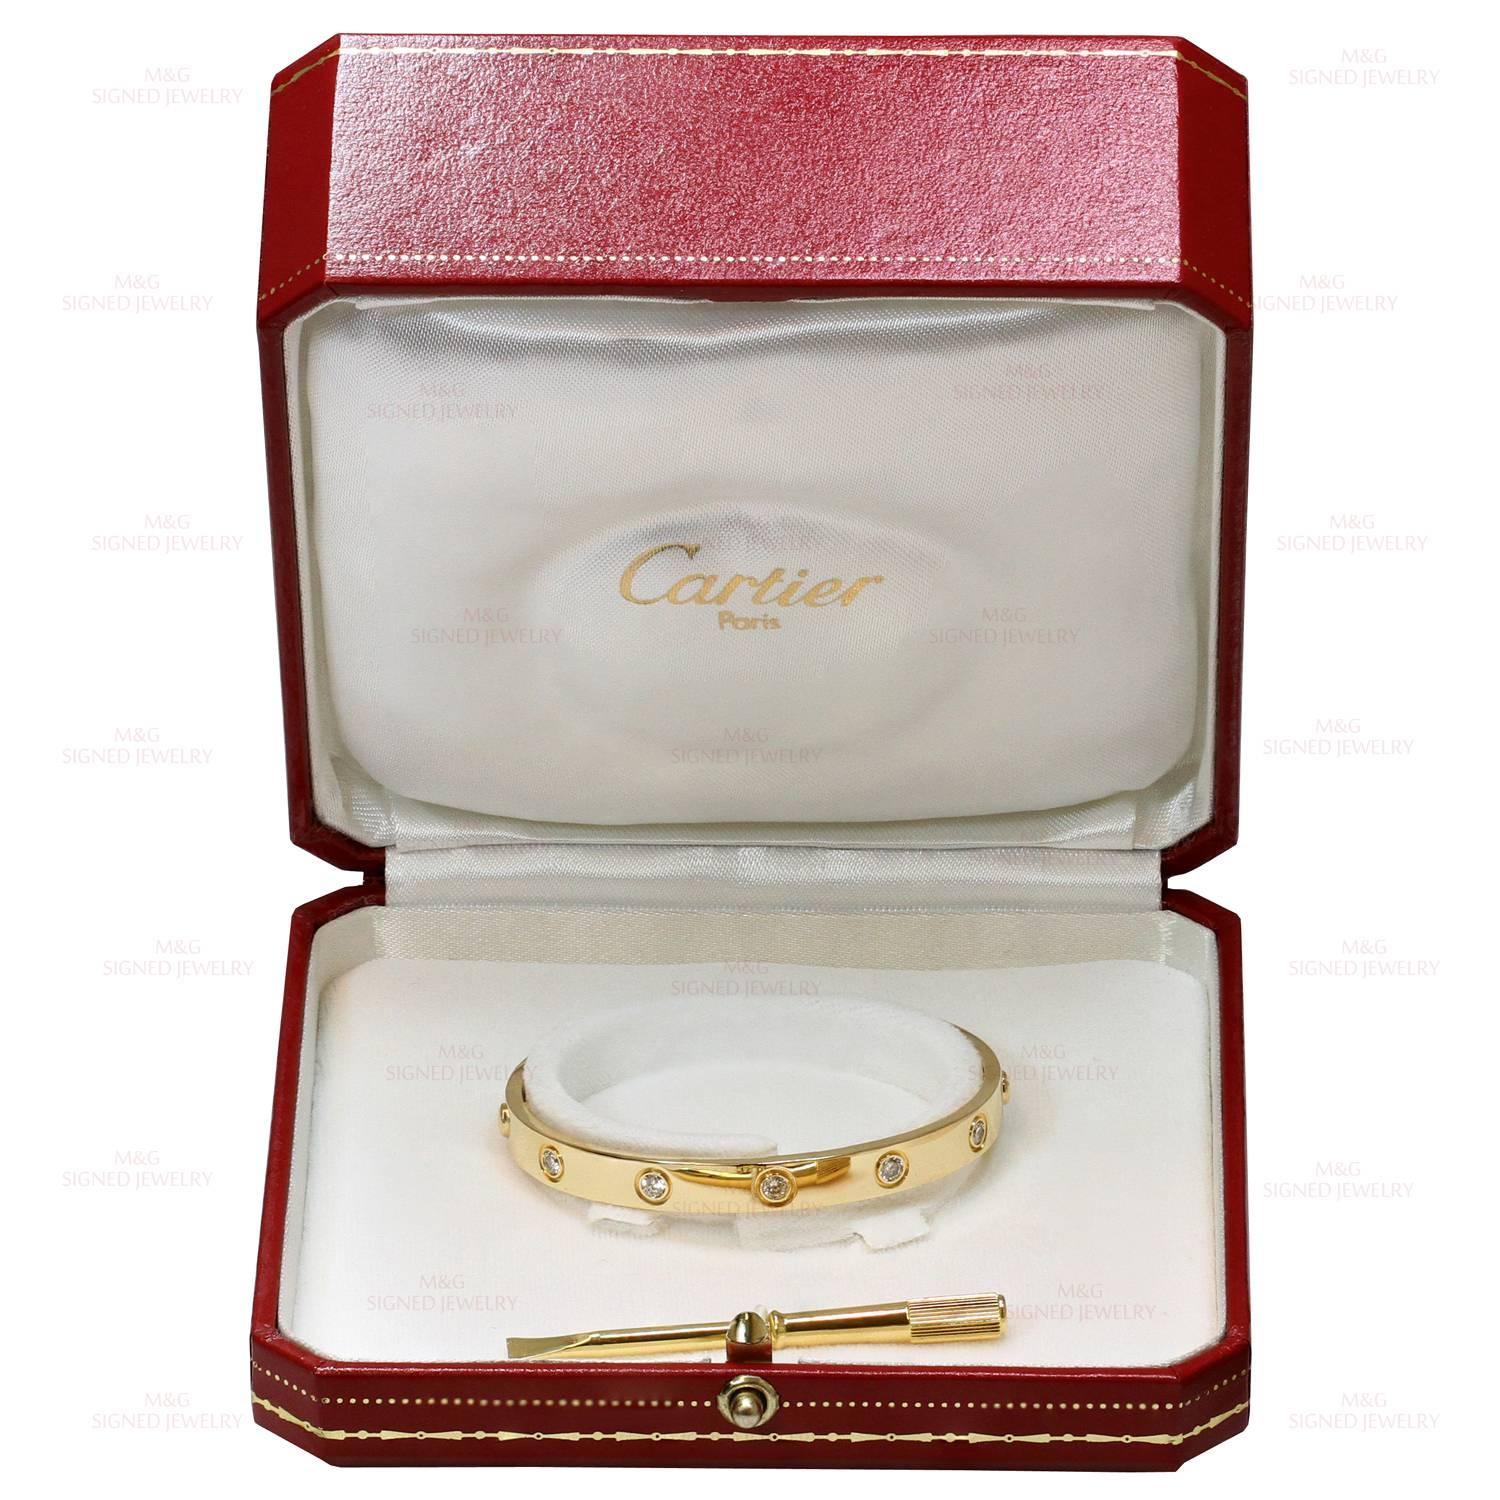 This iconic and timeless bracelet from Cartier's Love collection is finely crafted in 18k yellow gold and set with 10 brilliant-cut round diamonds. Completed with the original Cartier screwdriver, box, and papers. This bangle is a size 16. Made in